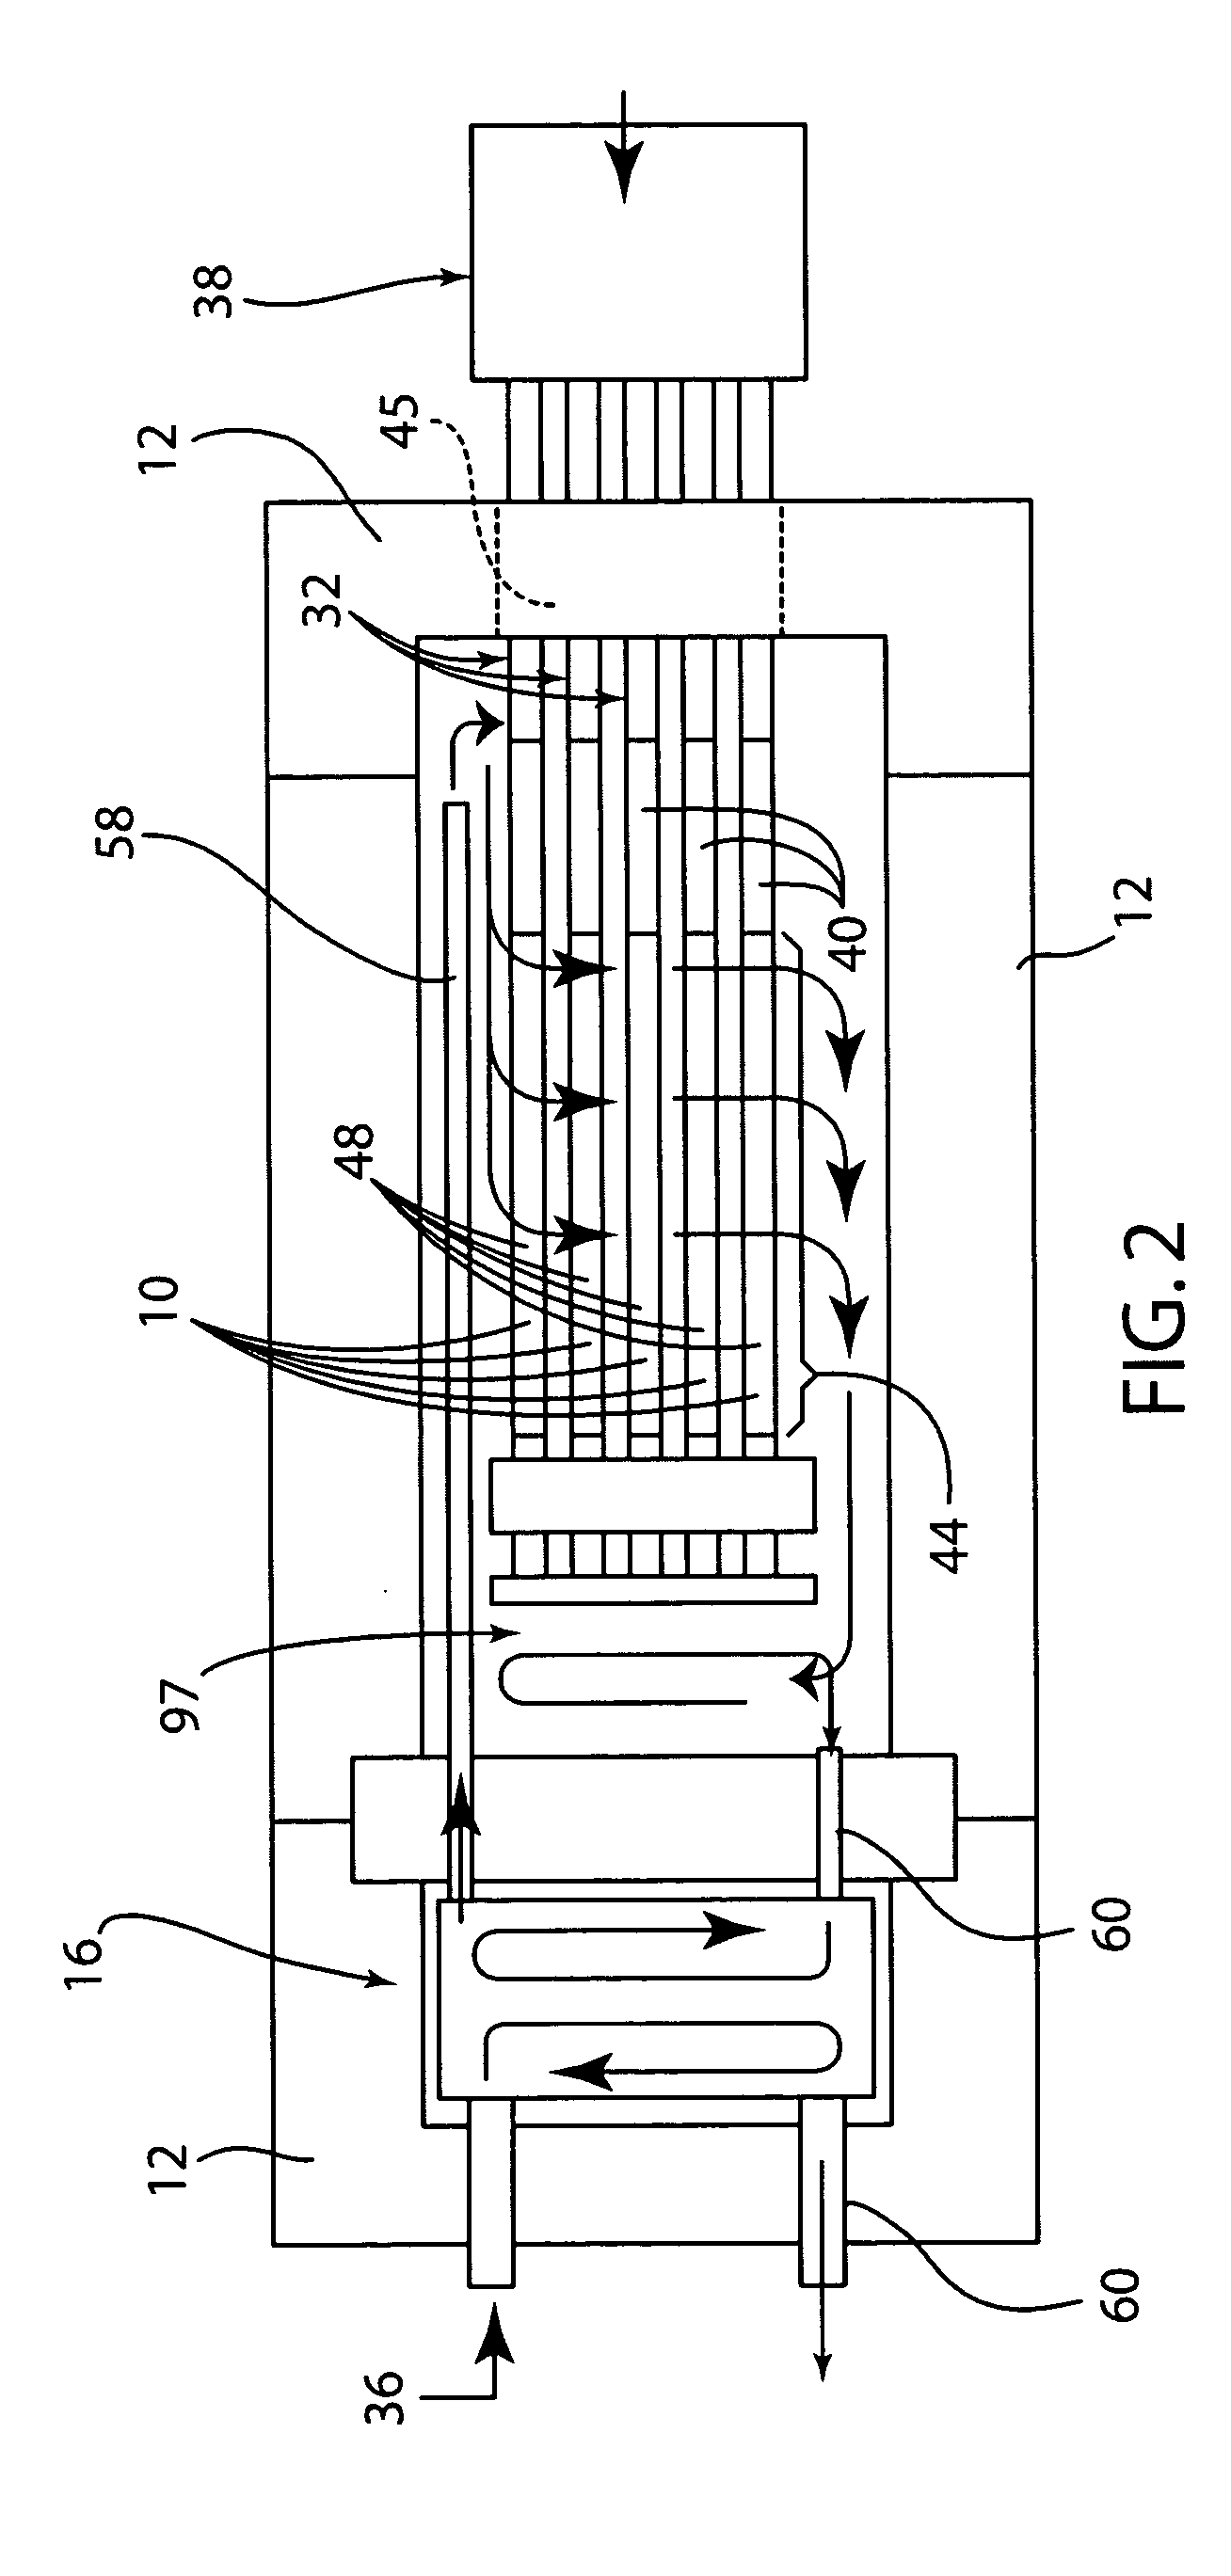 Solid oxide fuel cell tube with internal fuel processing